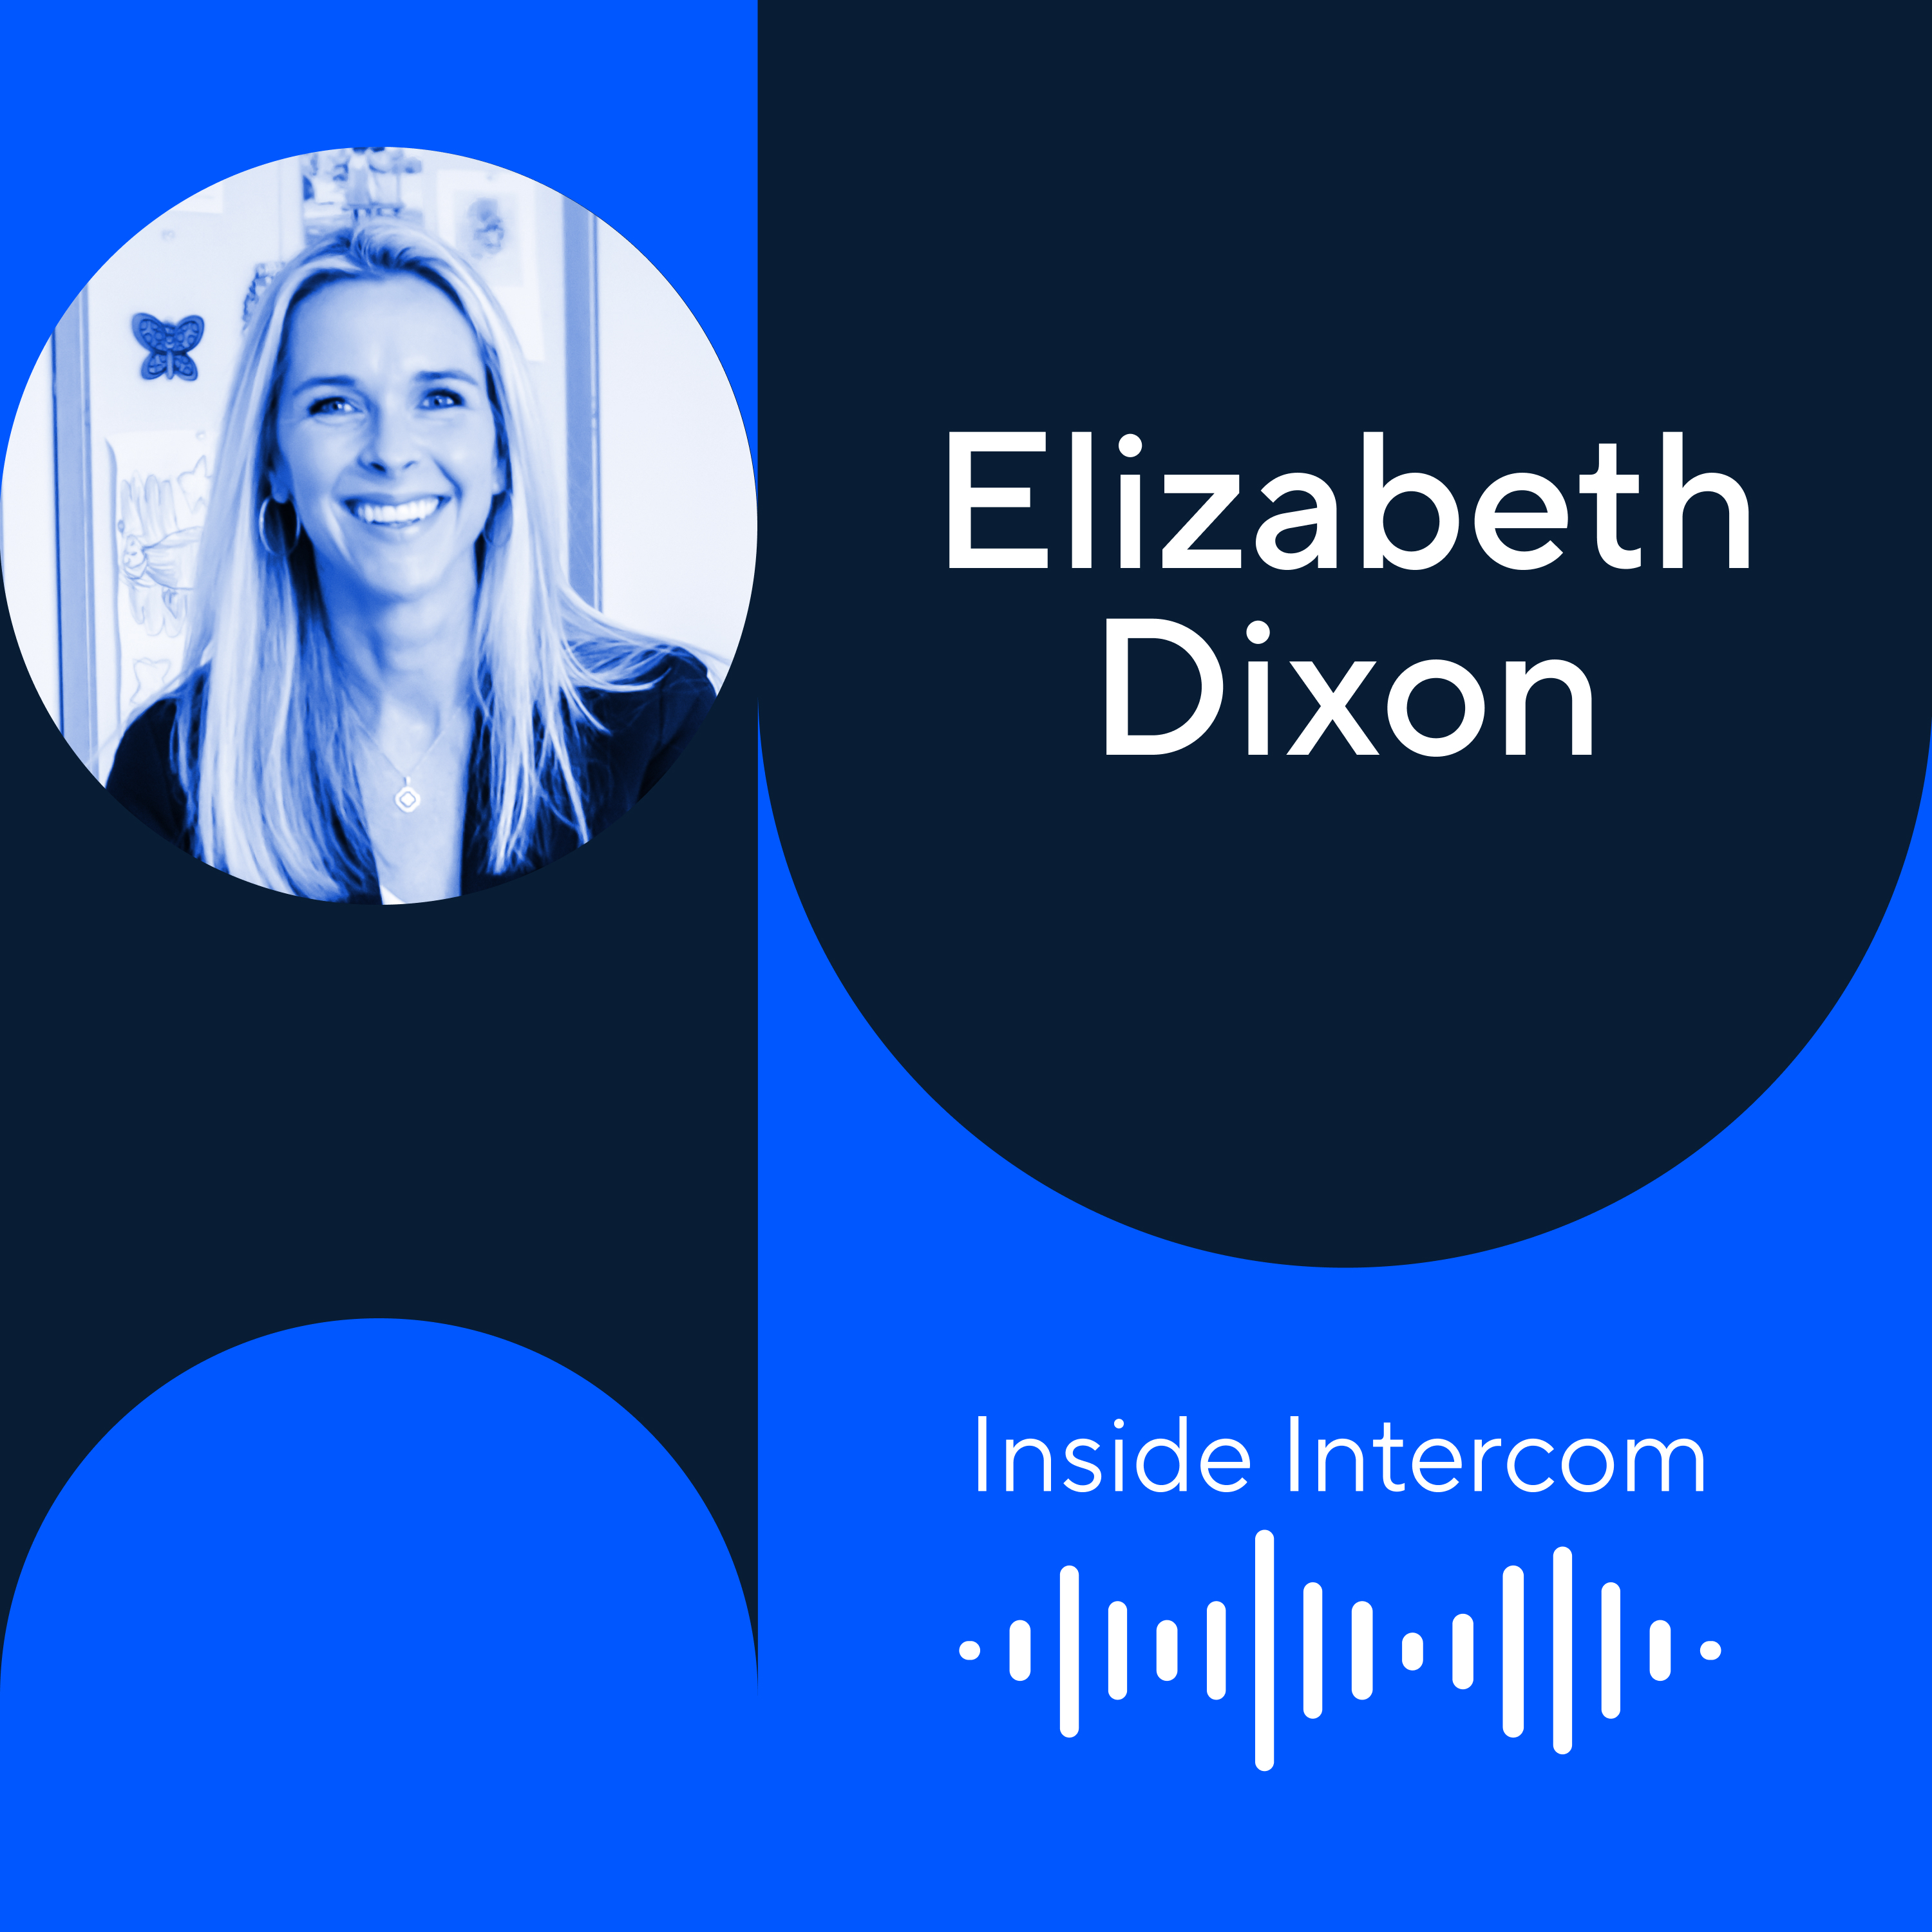 Customer Experience author Elizabeth Dixon on the CX that makes an impact